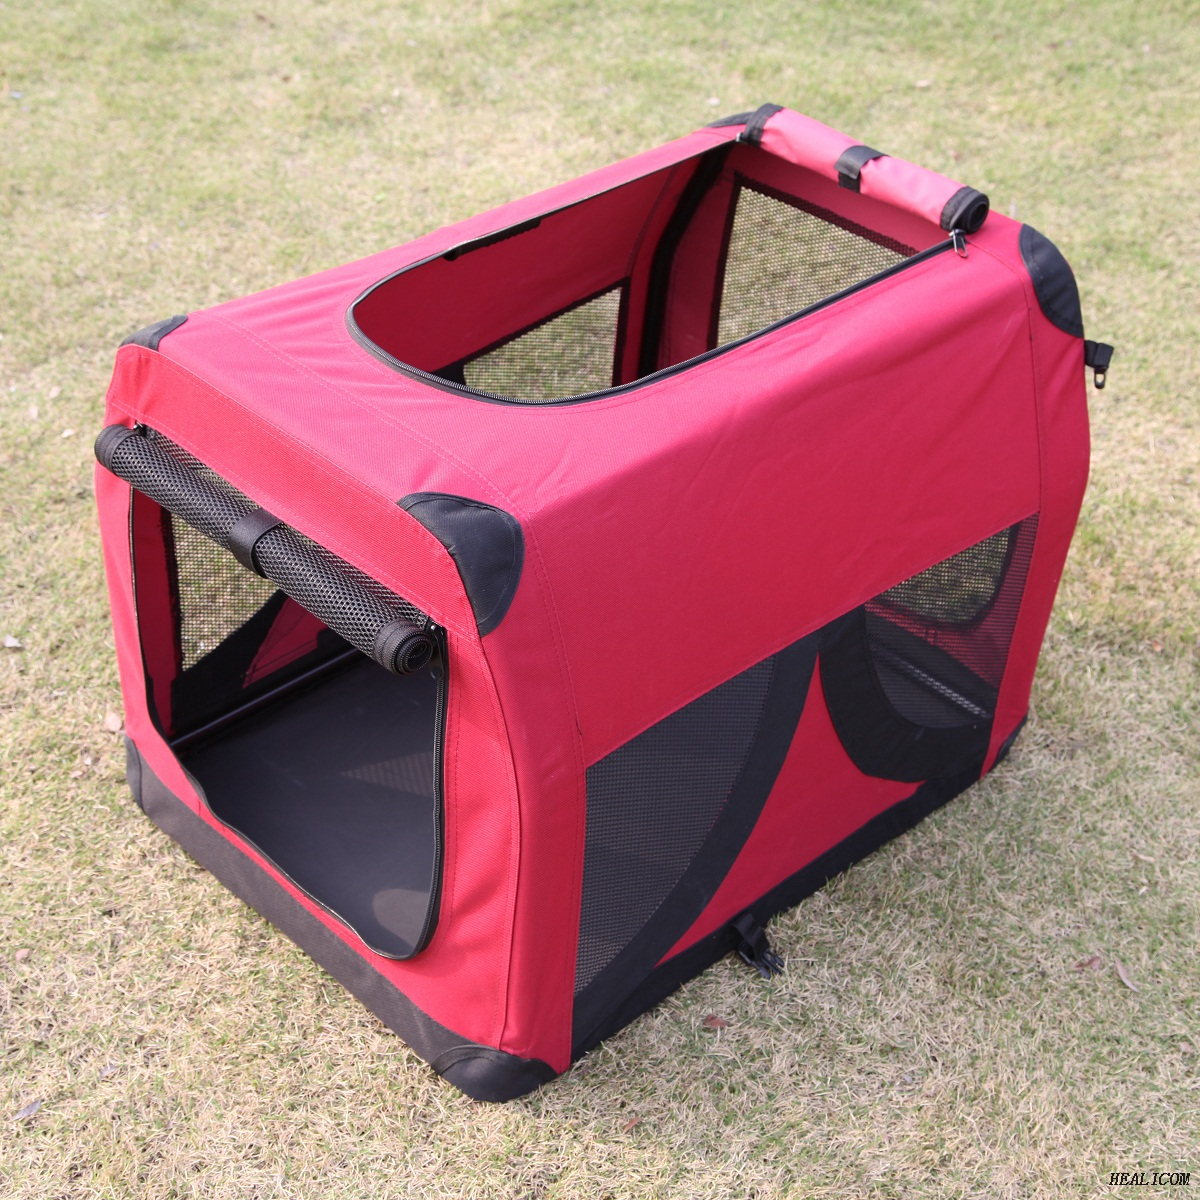 Hot sale TPA0001 Pet cage special materials 600D nylon with PU coating.